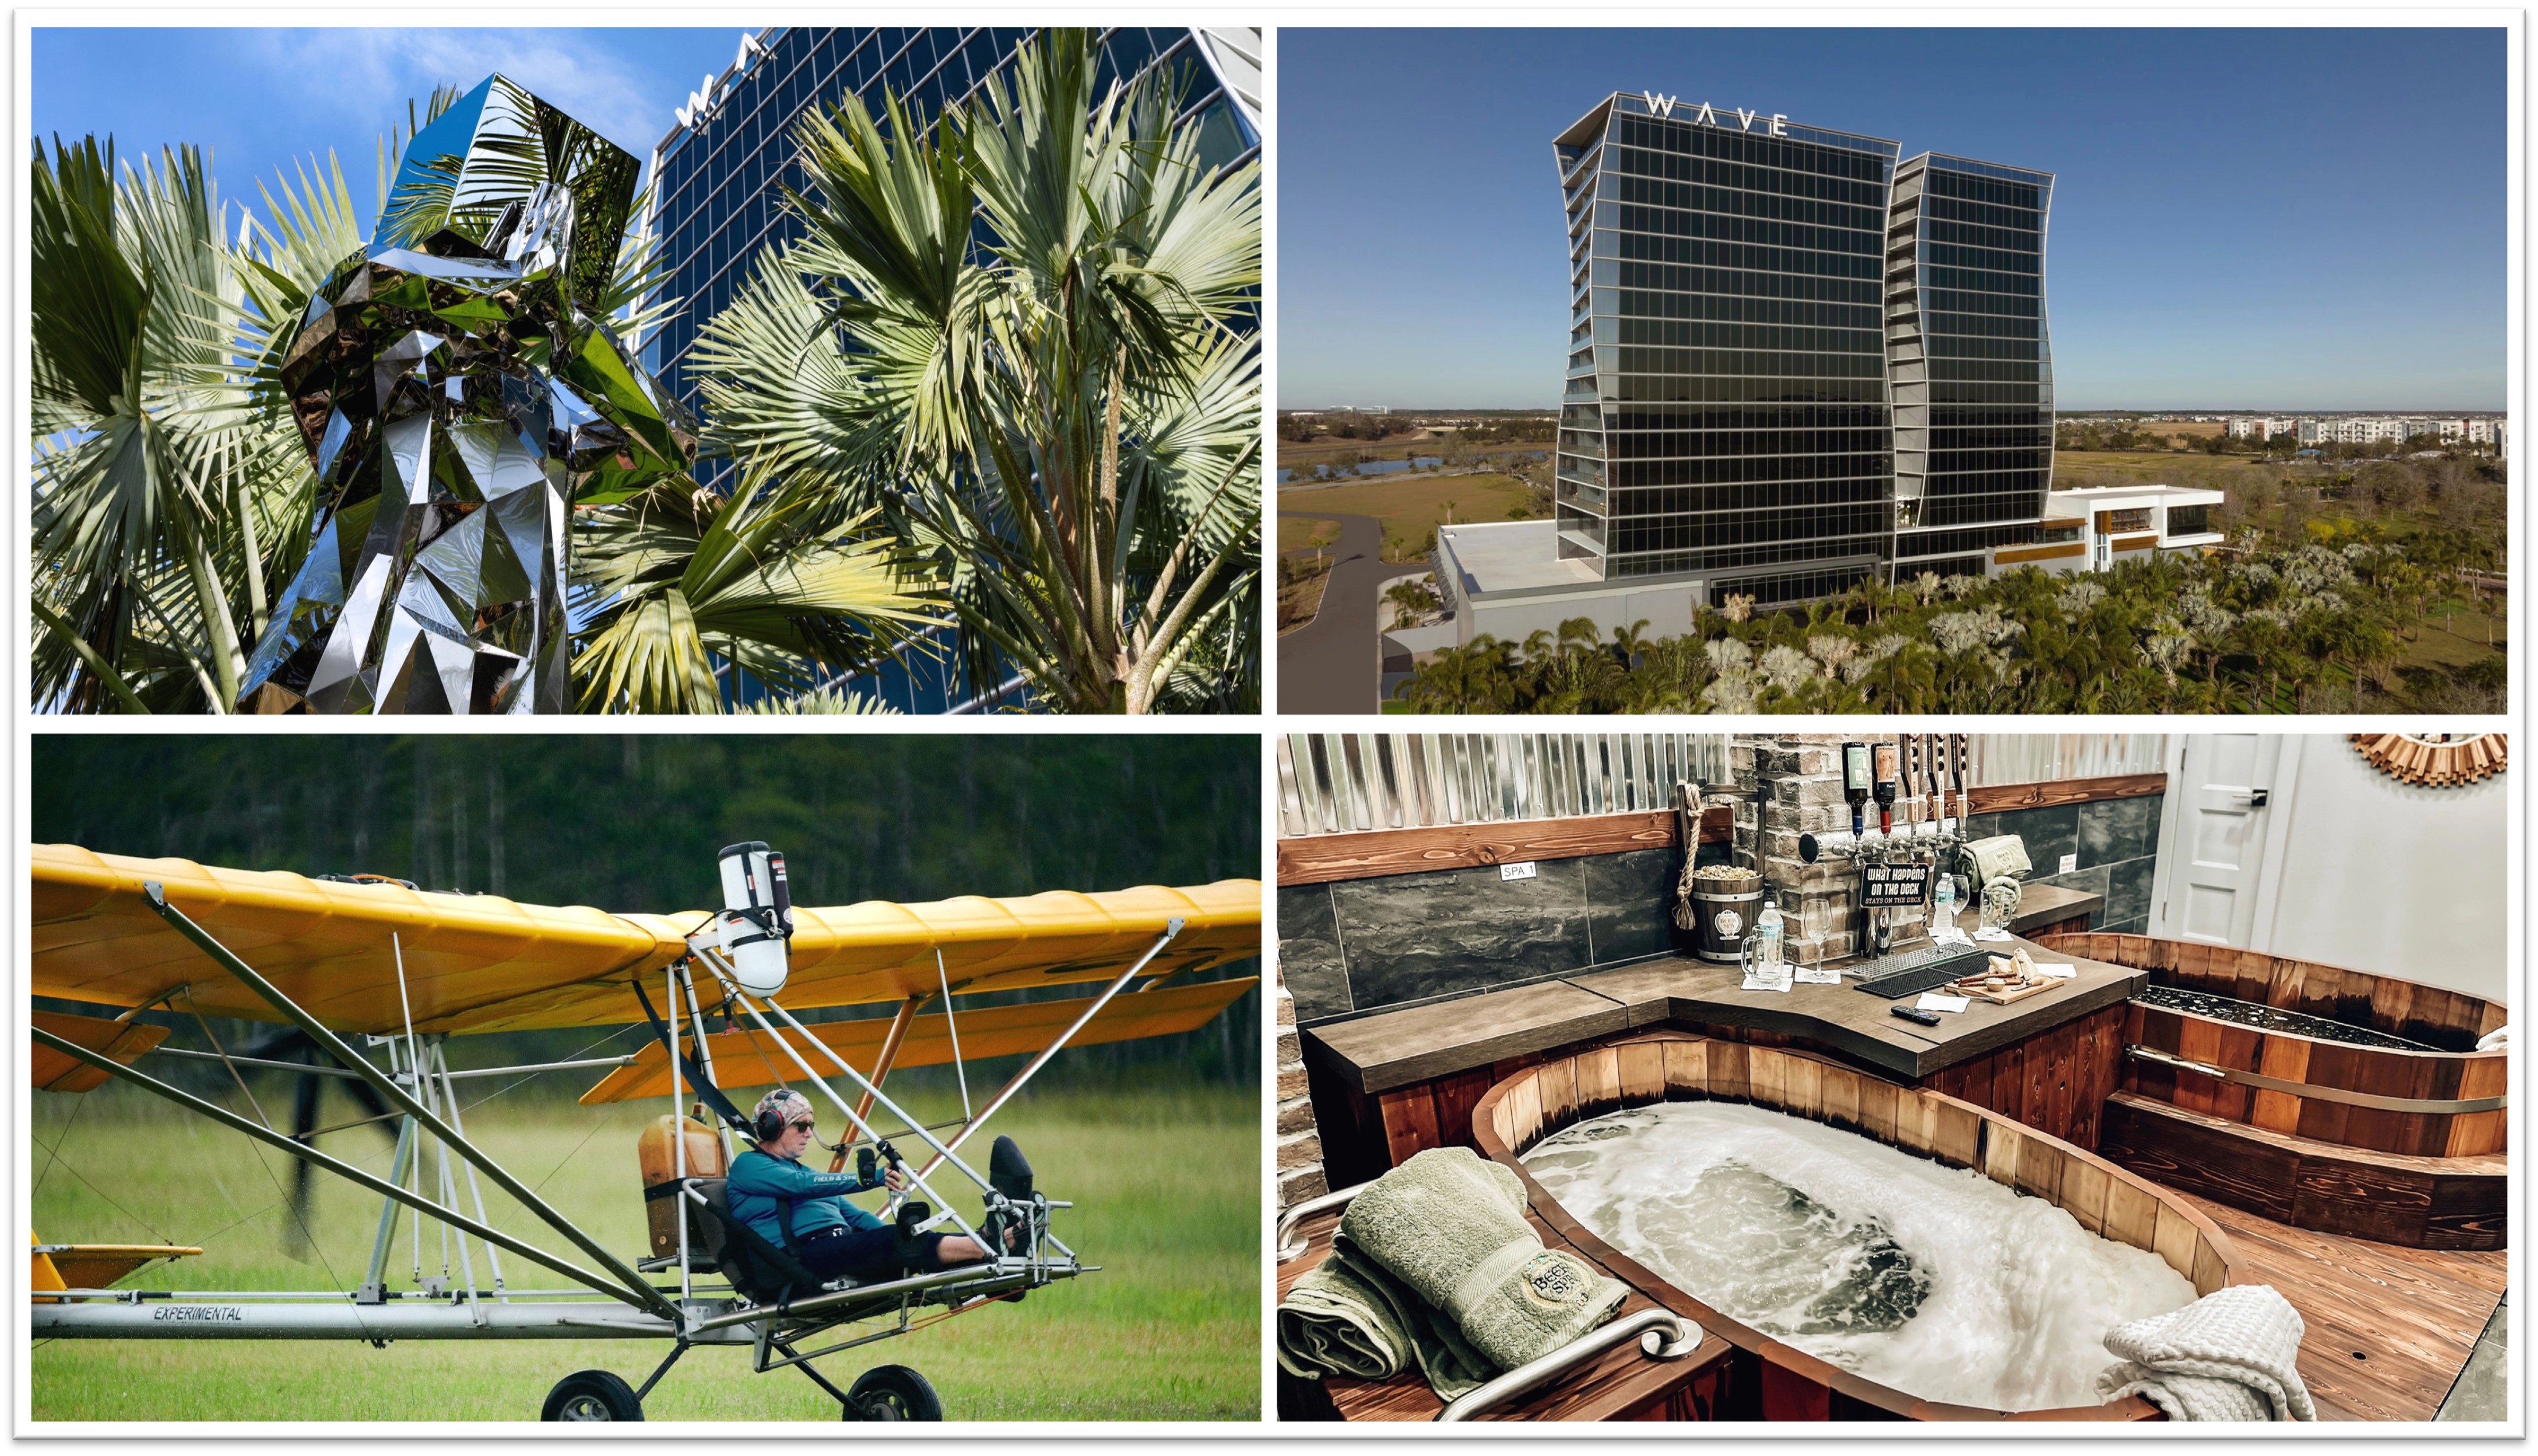 Orlando places and attractions, including the Lake Nona Wave Hotel, Sculpture Garden at the Lake Nona Wave Hotel, Wallaby Ranch and Beer Spa.  